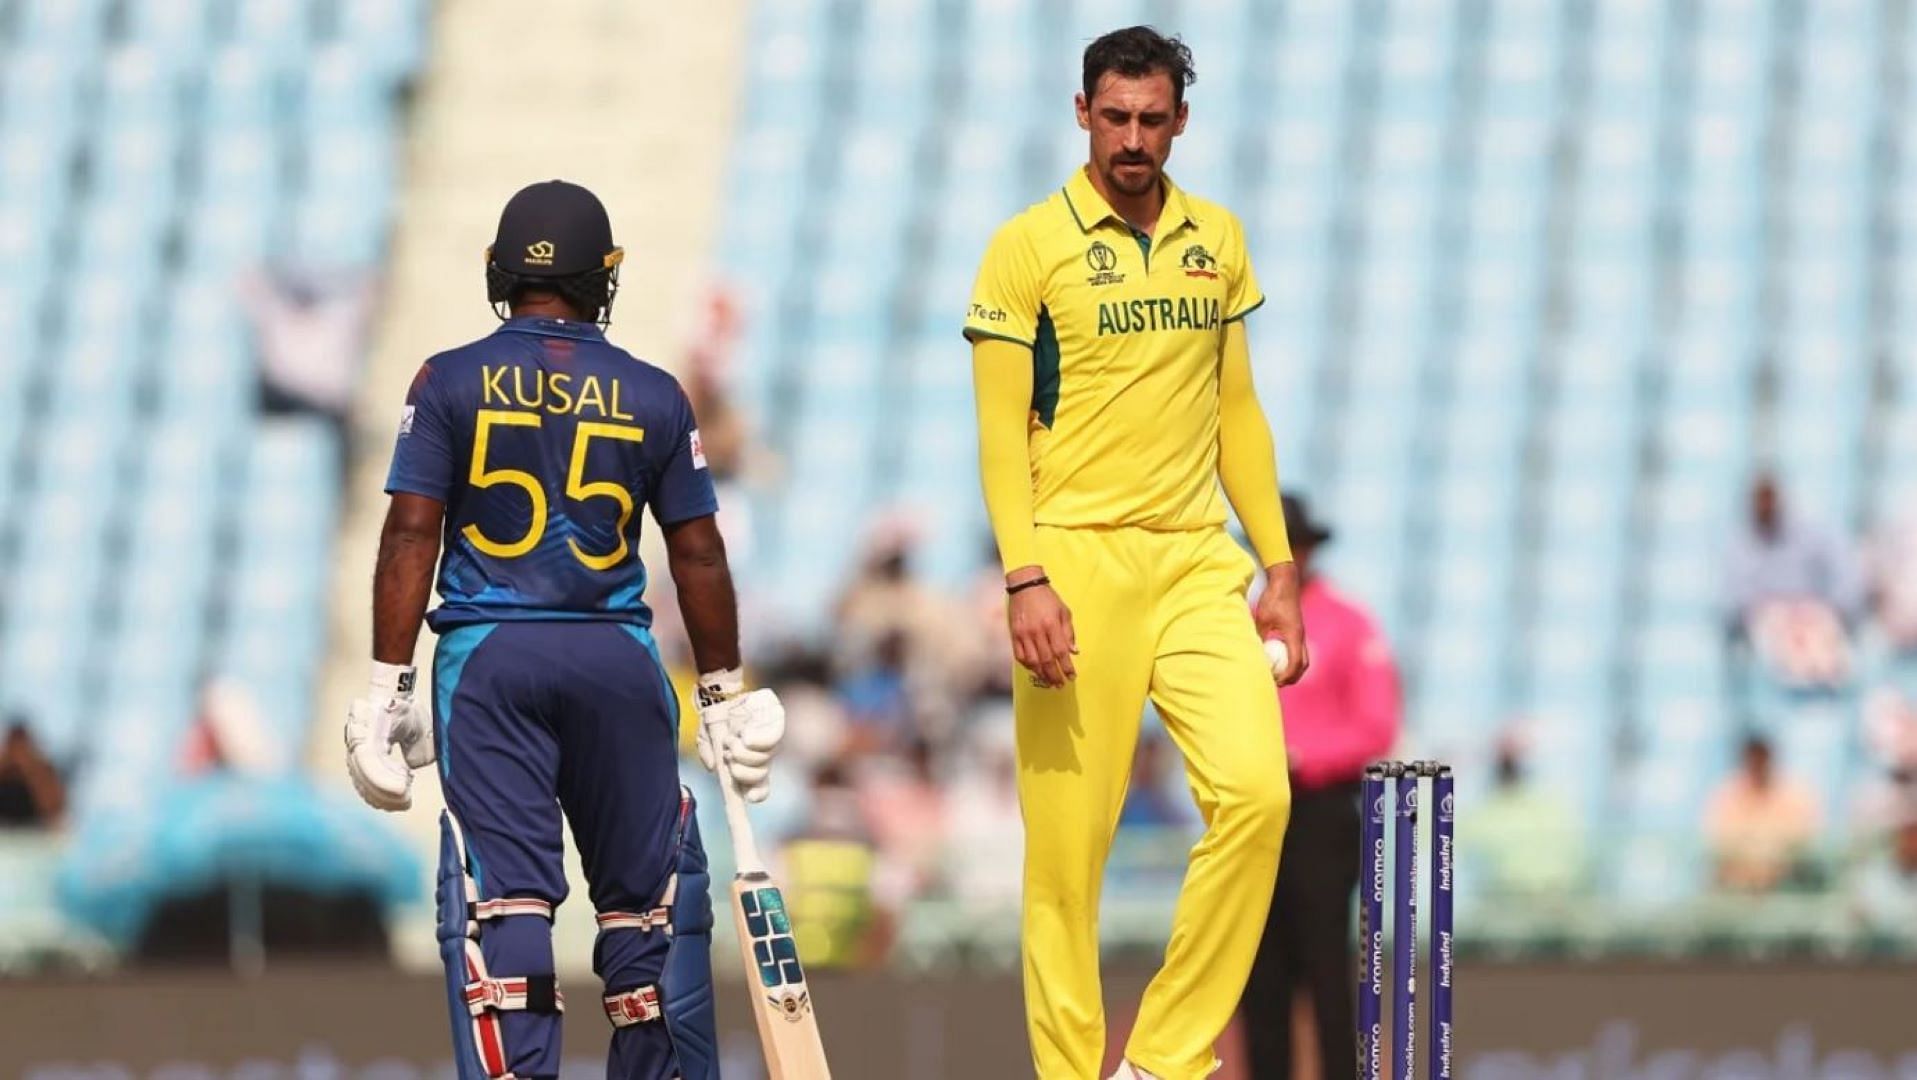 Mitchell Starc wasn&#039;t too happy about Kusal Perera venturing out of his crease at the non-striker&#039;s end.